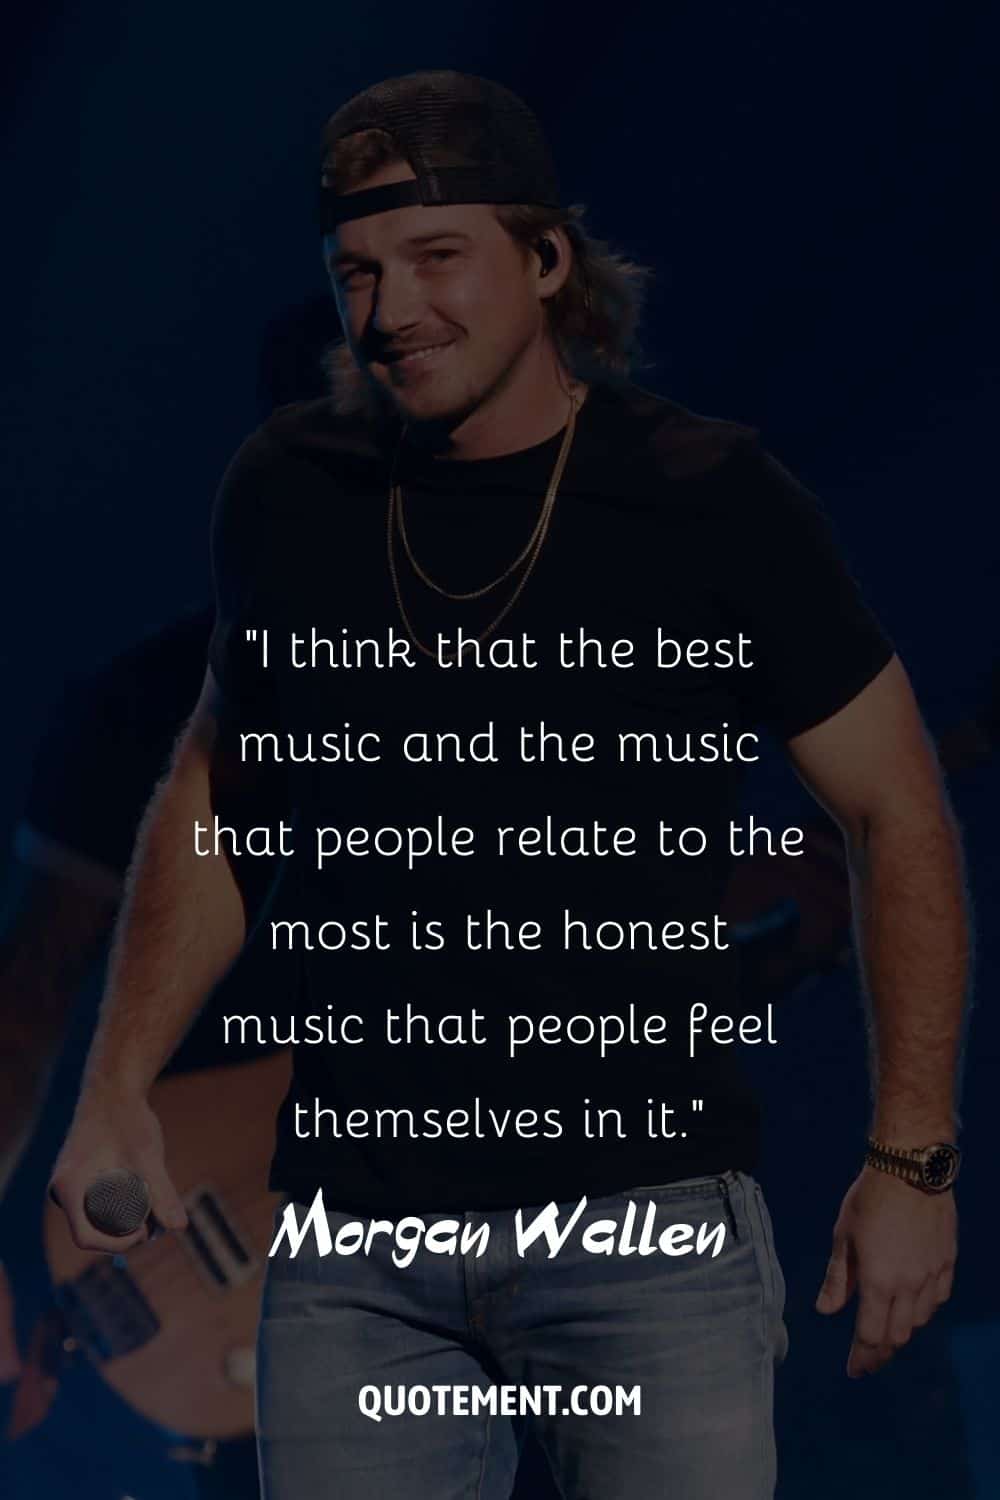 a male artist with golden necklaces representing morgan wallen quote for instagram